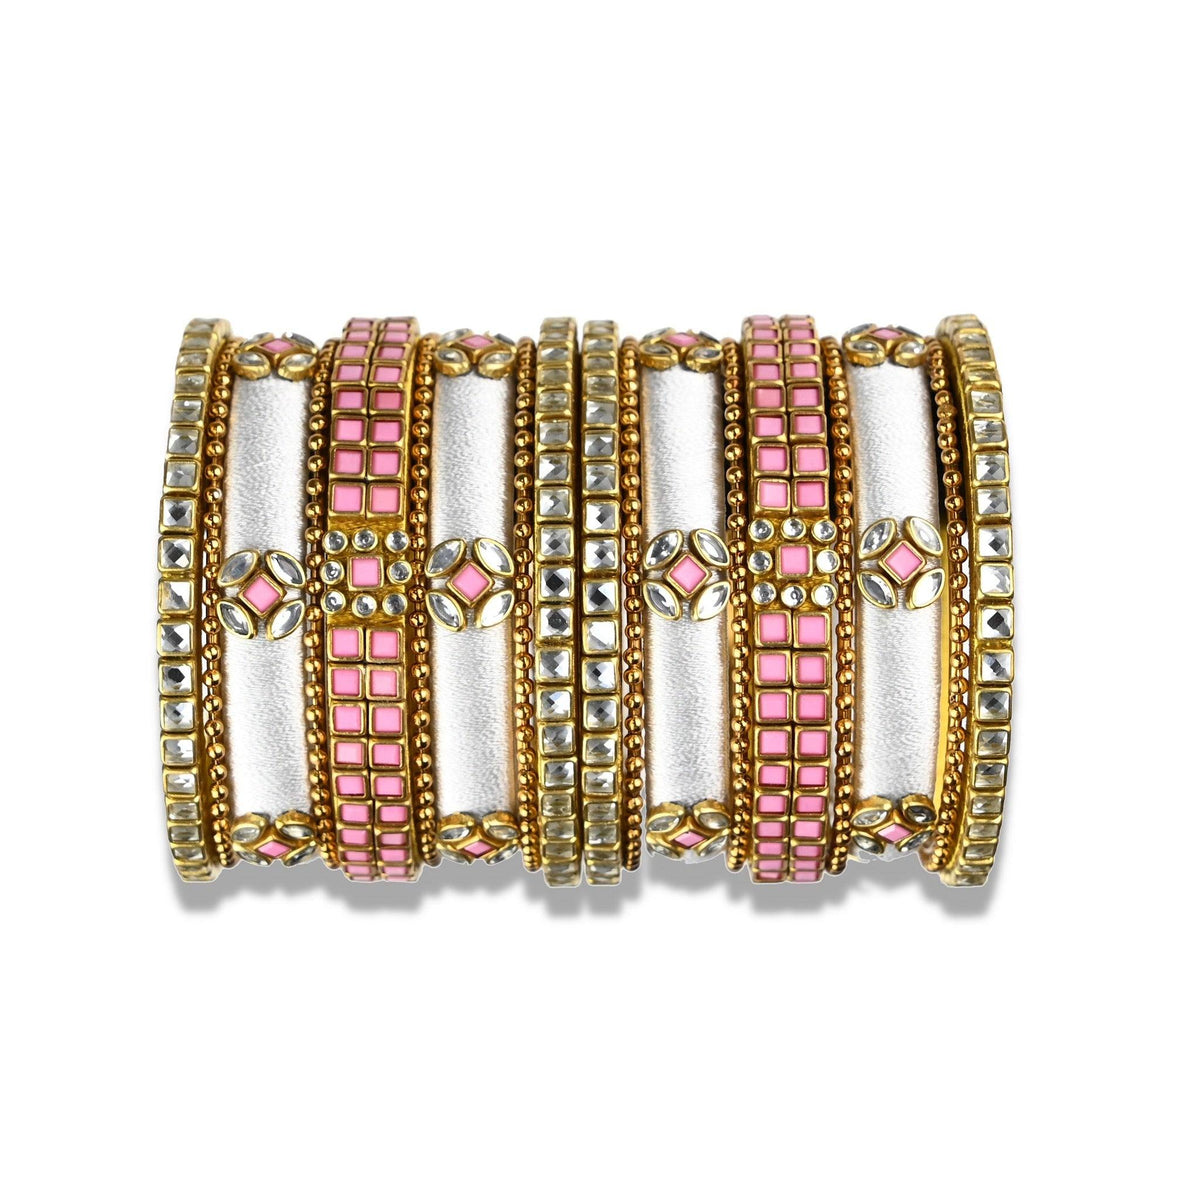 A divine set of silk thread bangles beautifully ornamented with white silk thread with pink & glass colored  kundan stone bezels. The bangles comes in a set of 18 with 9 for each hand.